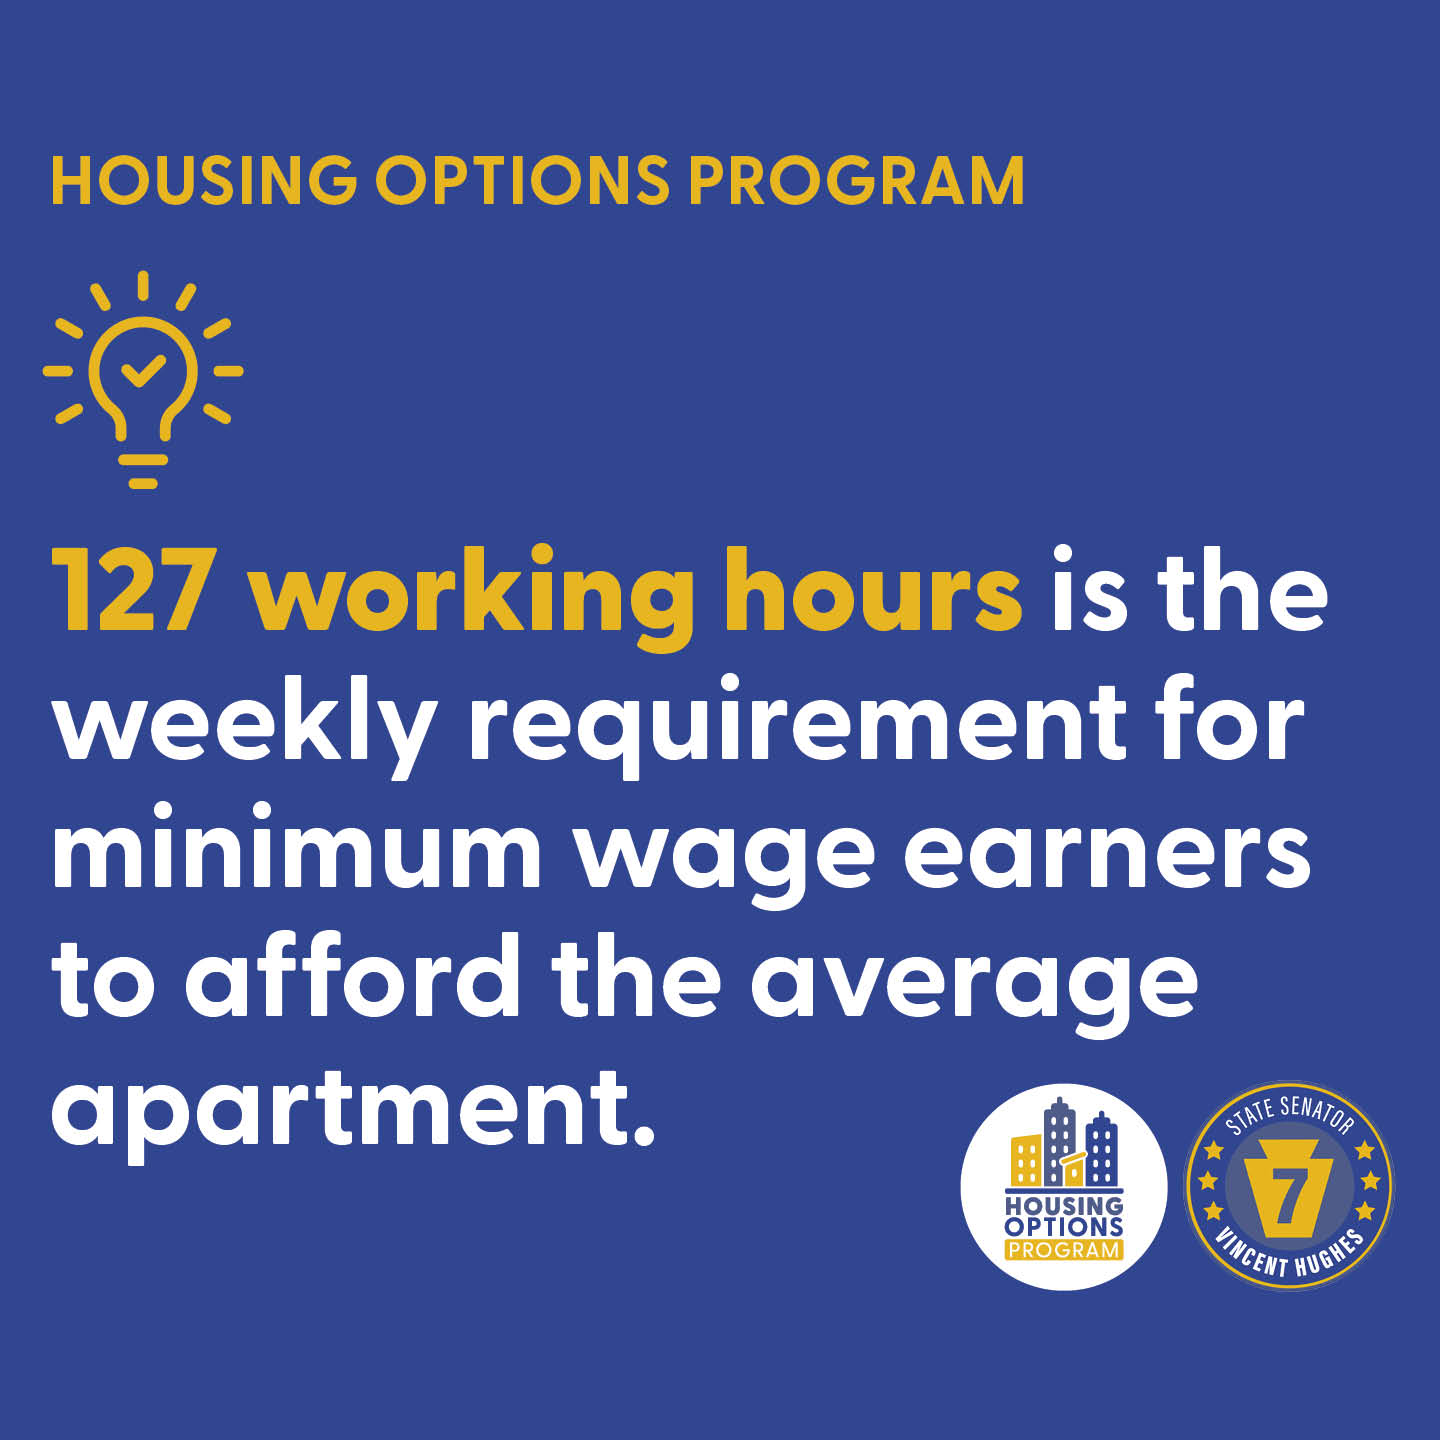 HOUSING OPTIONS PROGRAM - 127 working hours is the weekly requirement for minimum wage earners to afford the average apartment.